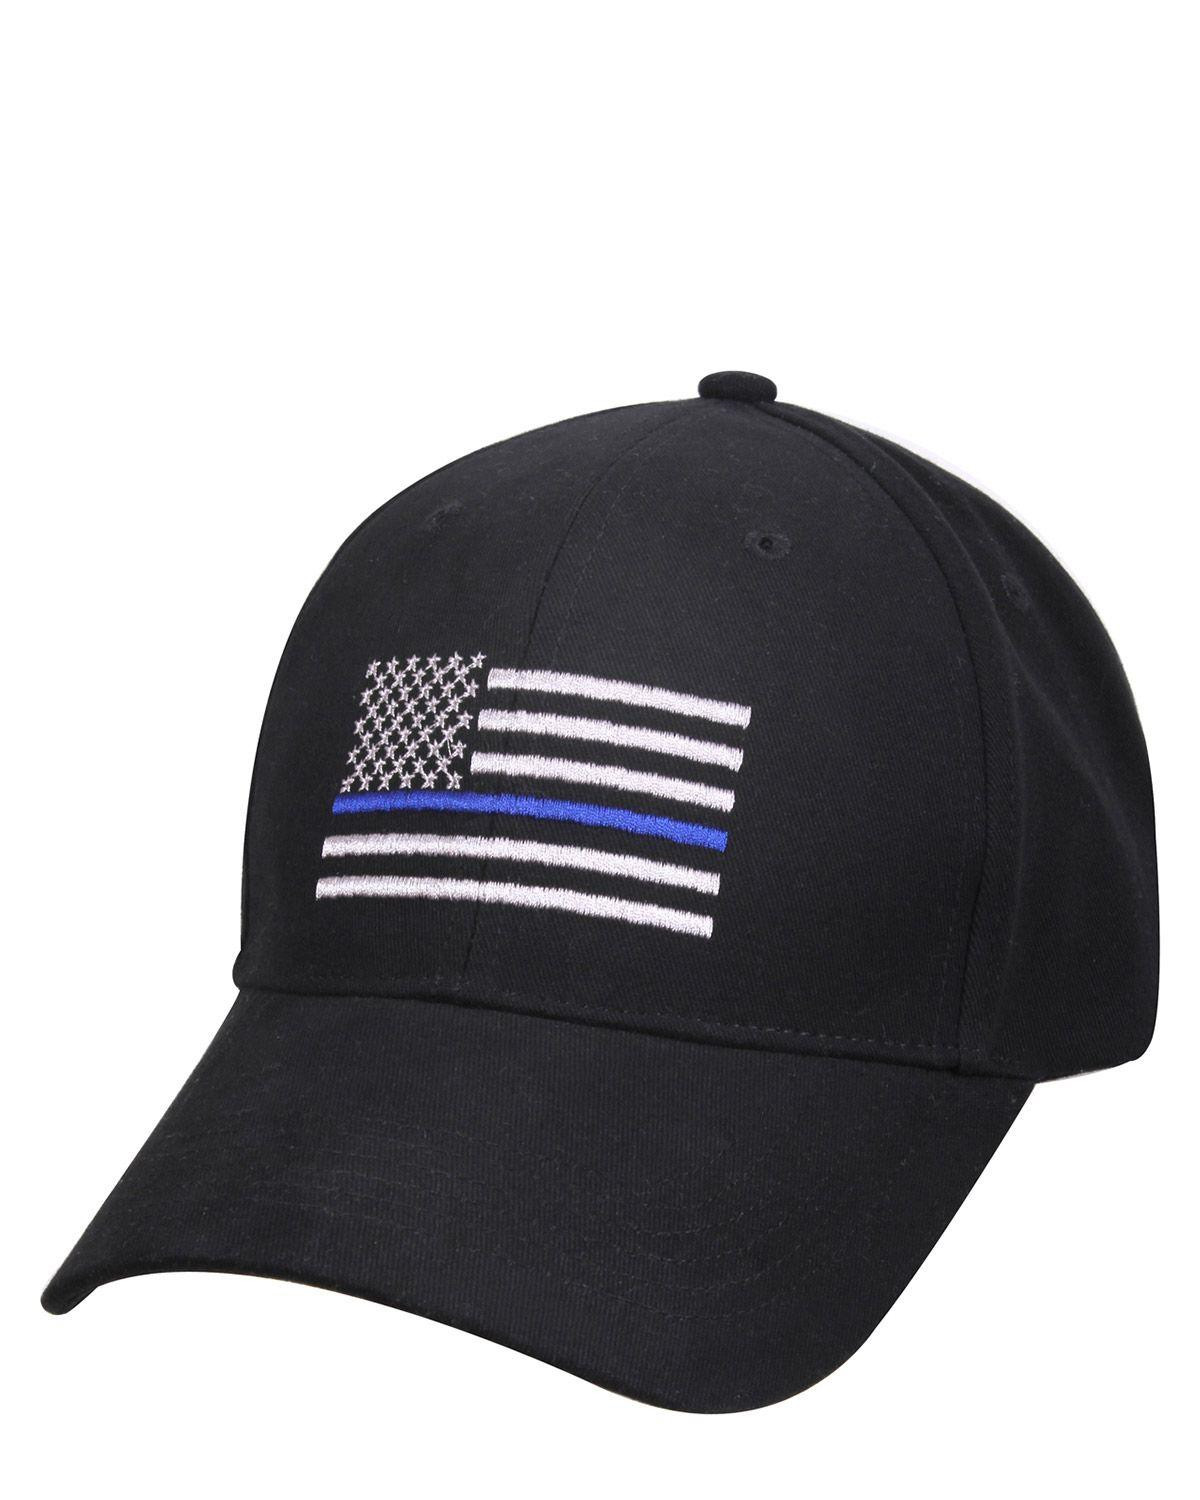 Rothco Low Profile Cap - Thin Blue Line (Sort, One Size)